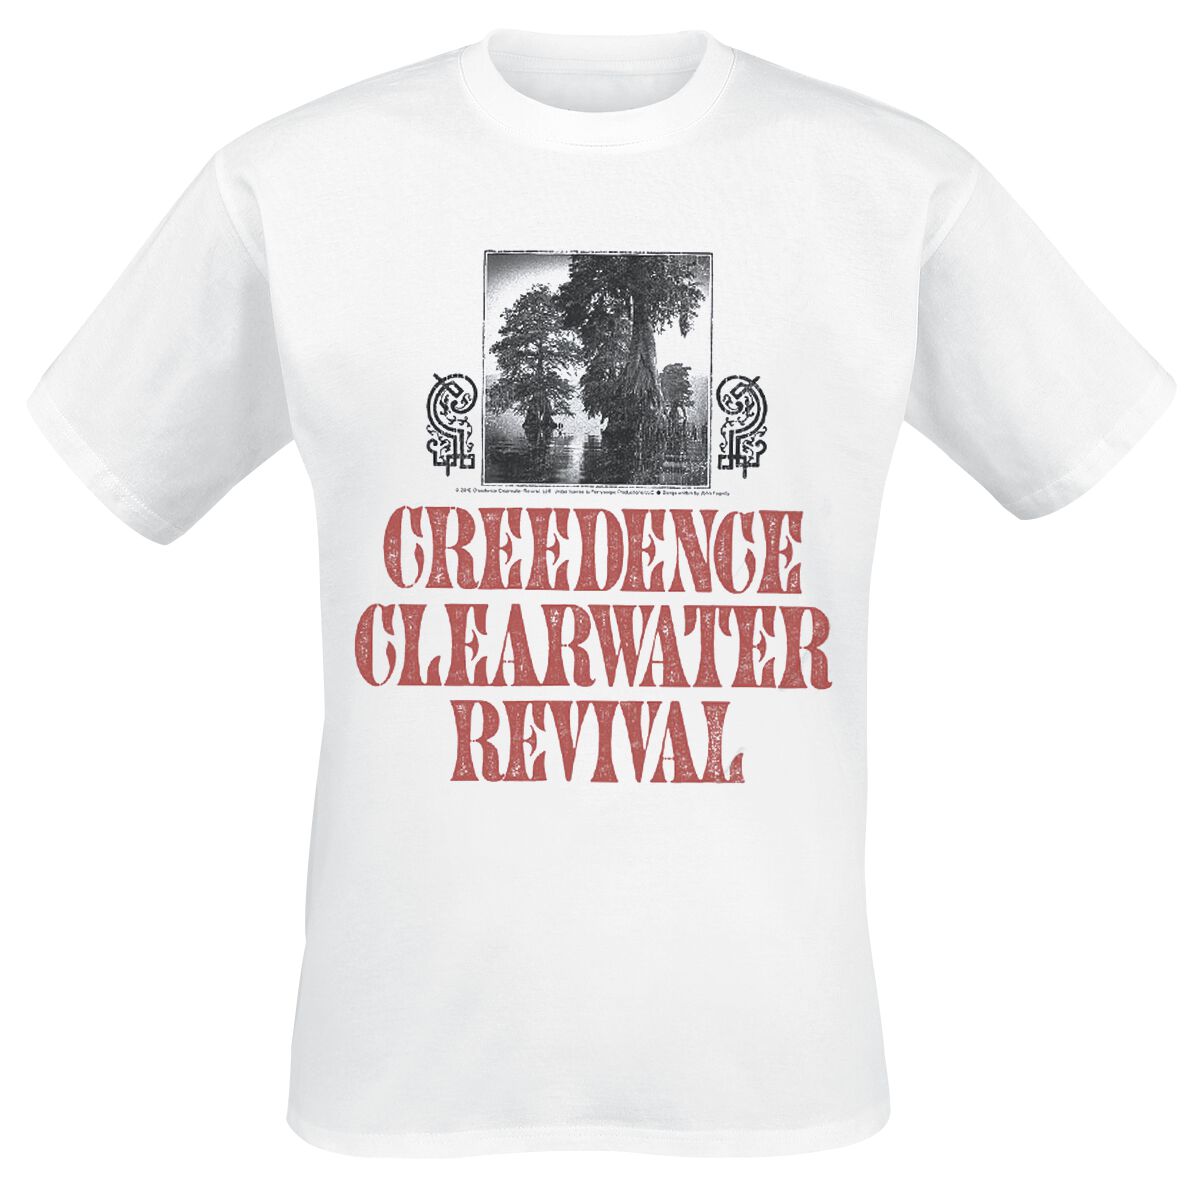 Creedence Clearwater Revival (CCR) Bayou Photo T-Shirt white